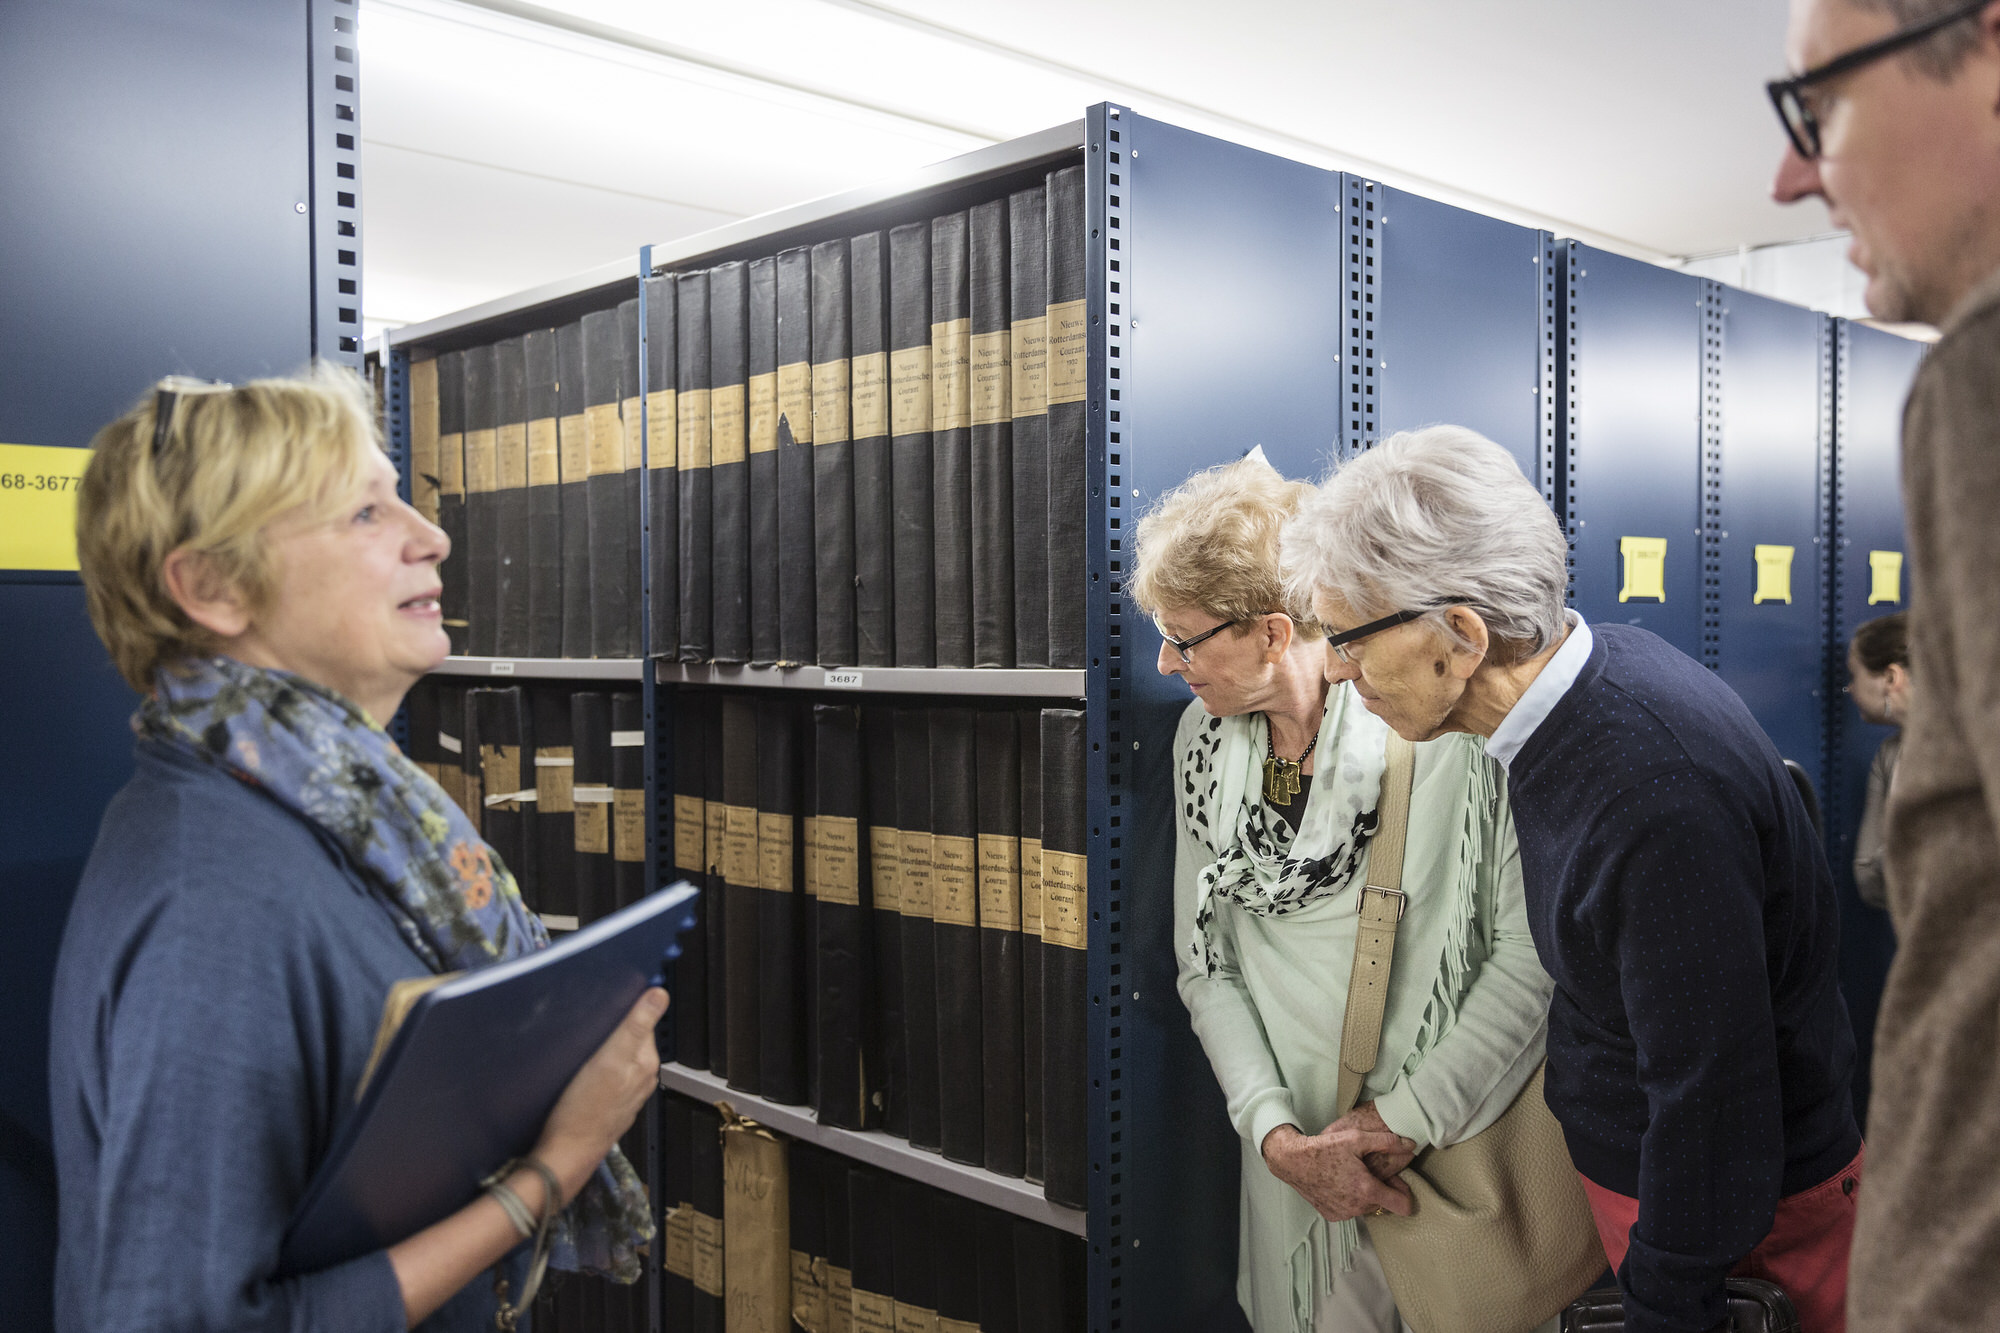 Behind the scenes of the Hendrik Conscience Heritage Library